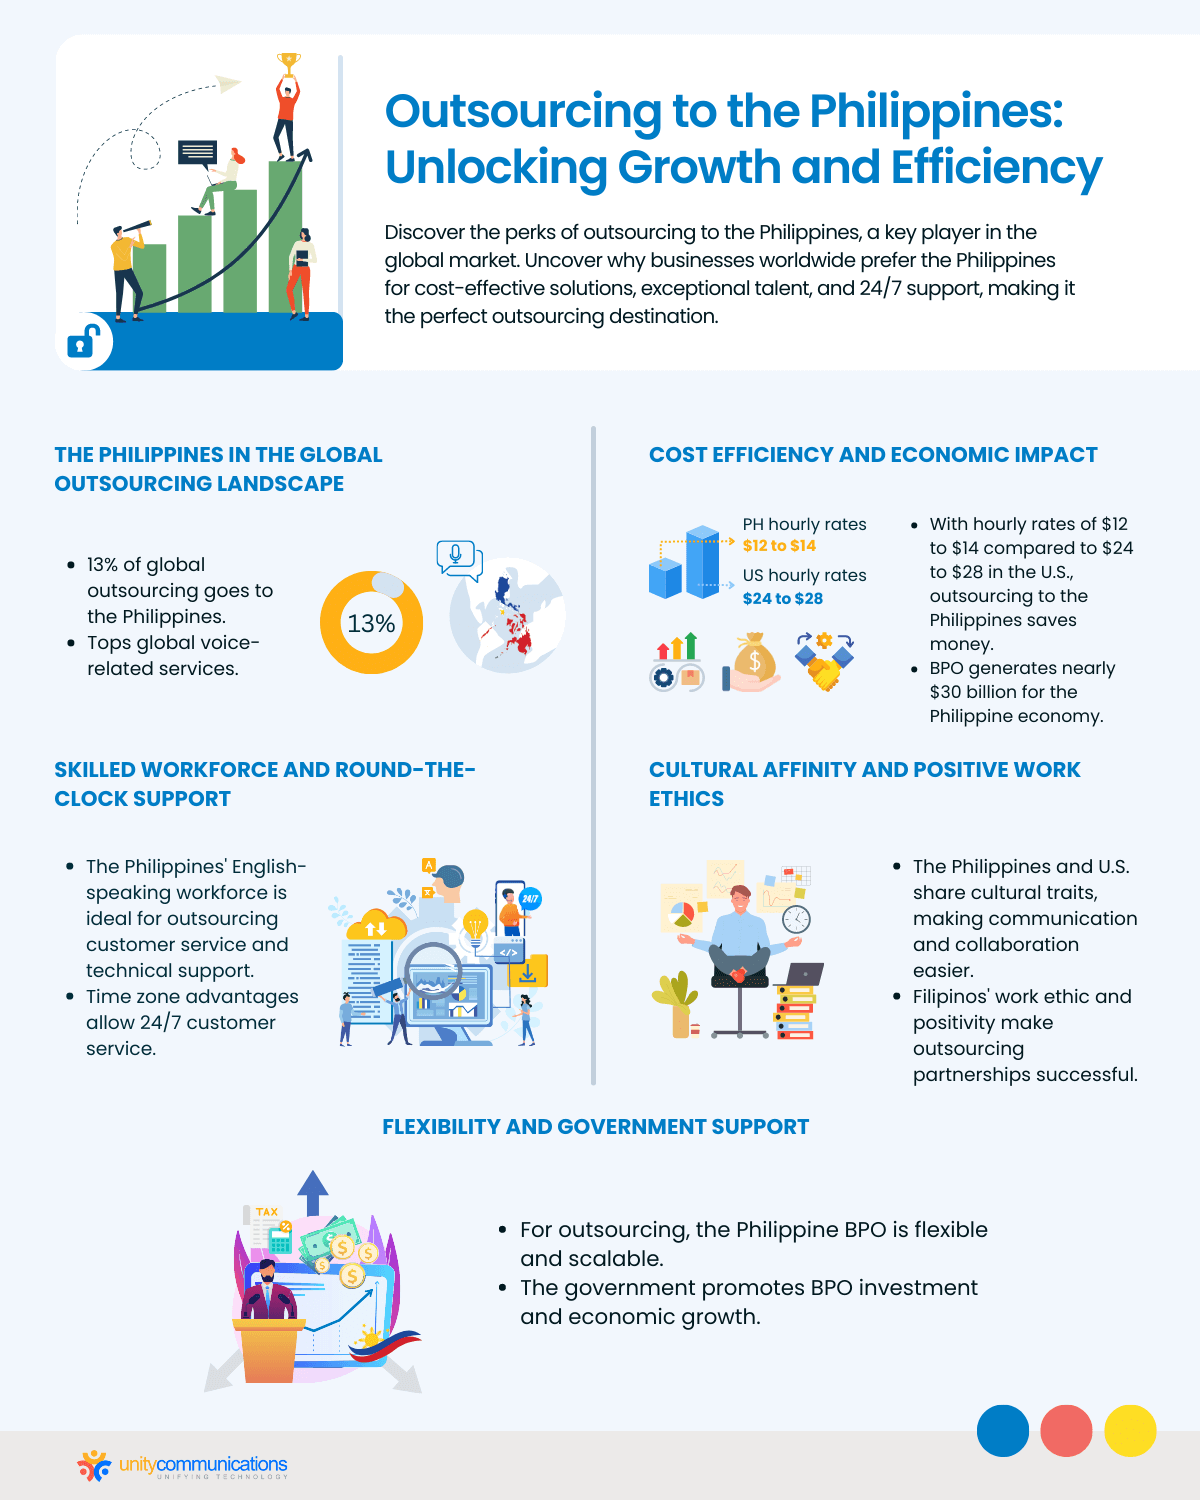 Outsourcing to the Philippines Unlocking Growth and Efficiency